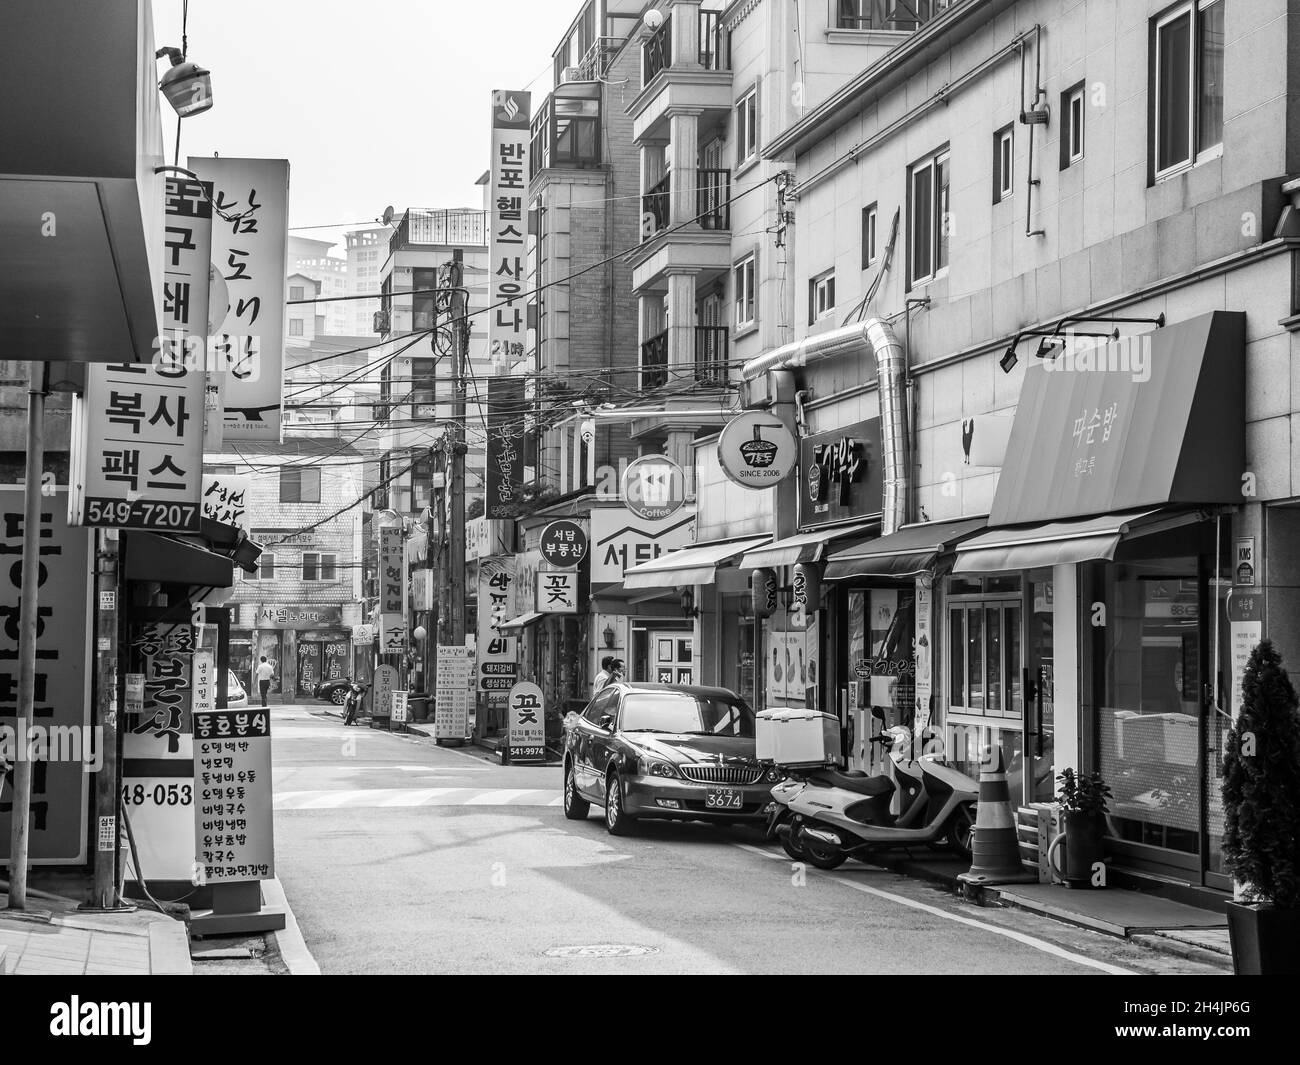 Seoul, South Korea - June 16, 2017: Cars on the street in Seoul downtown. Stock Photo